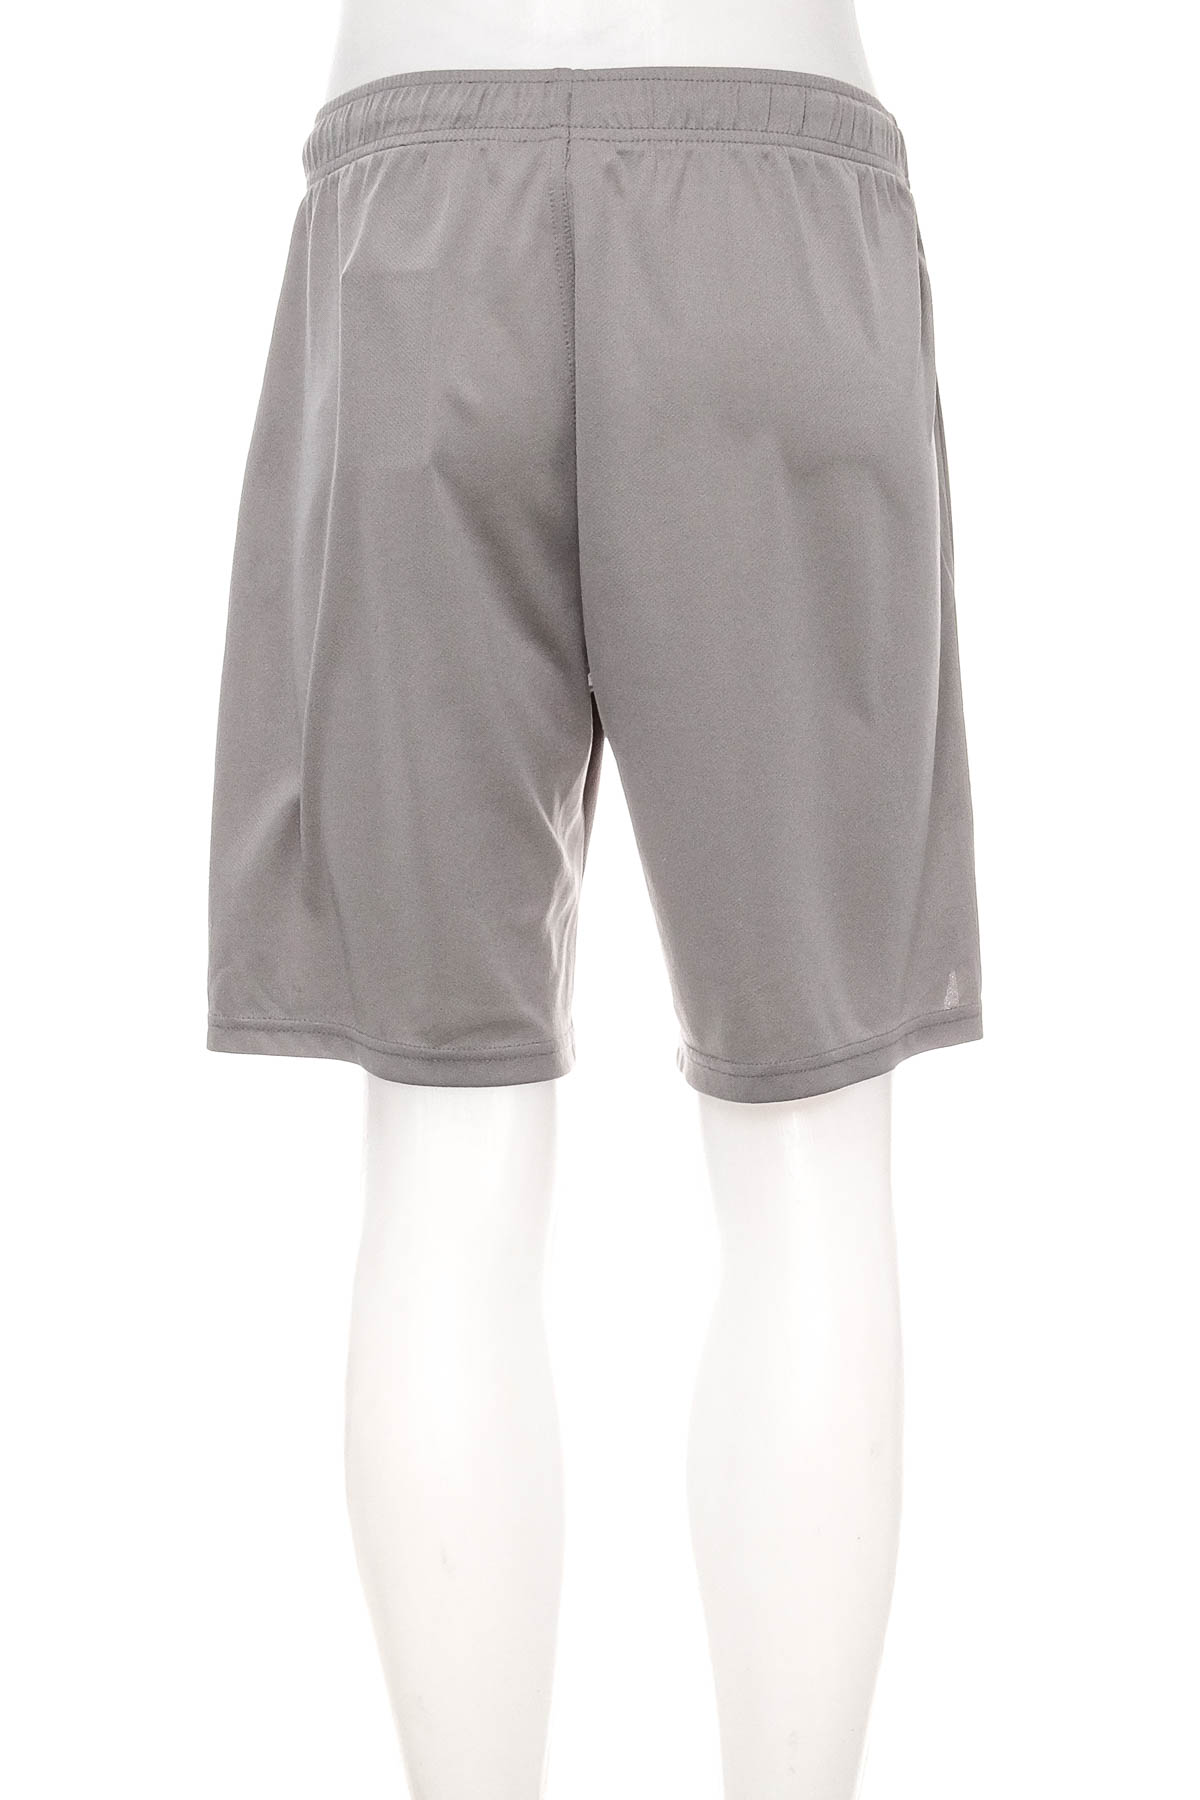 Shorts for boys - H&M Sport - 1